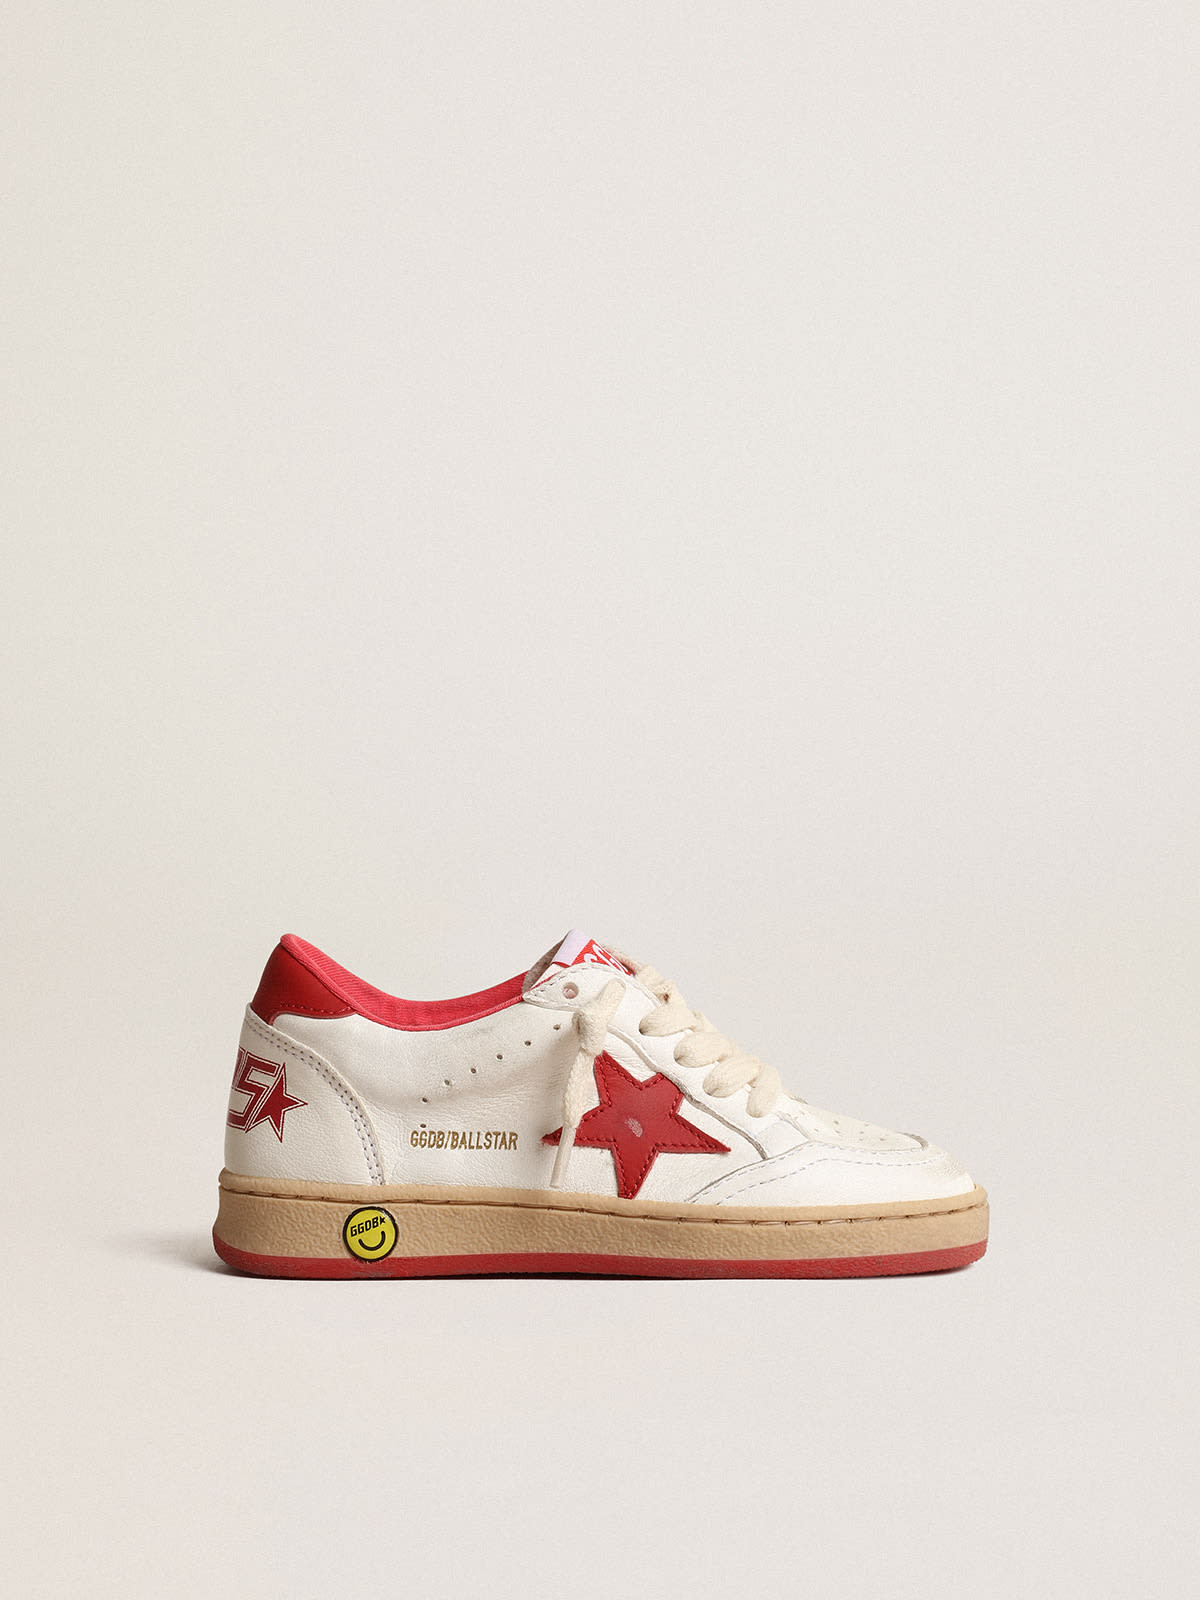 Golden Goose - Ball Star Young in nappa with red leather star and heel tab in 